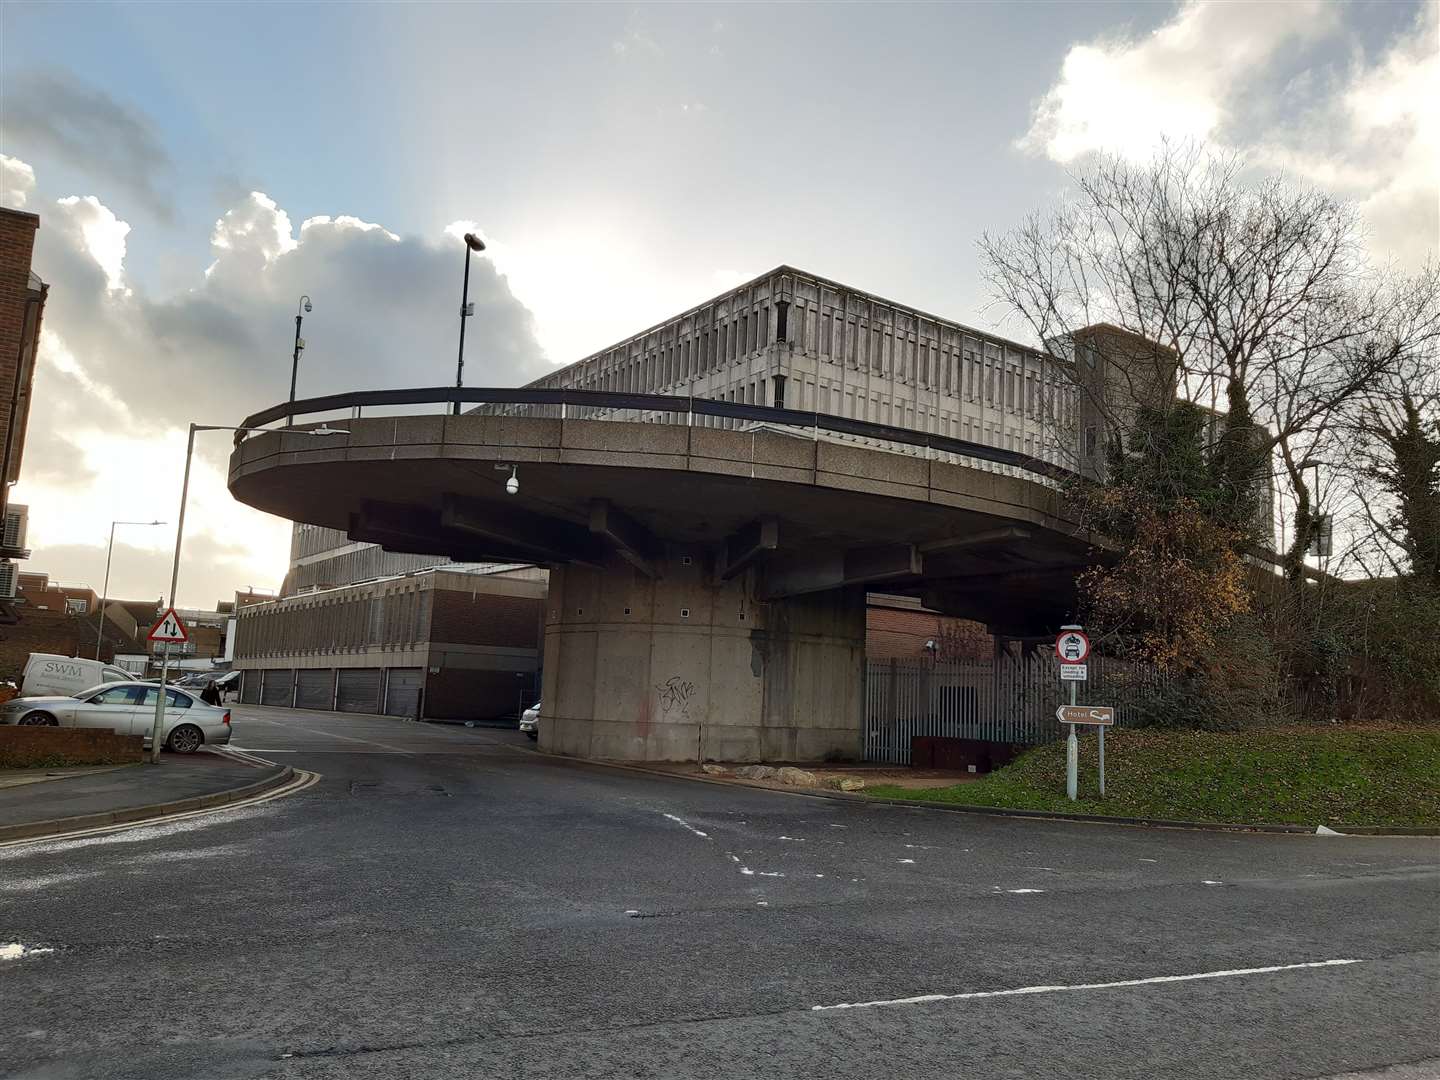 The changes to Edinburgh Road car park were approved last week